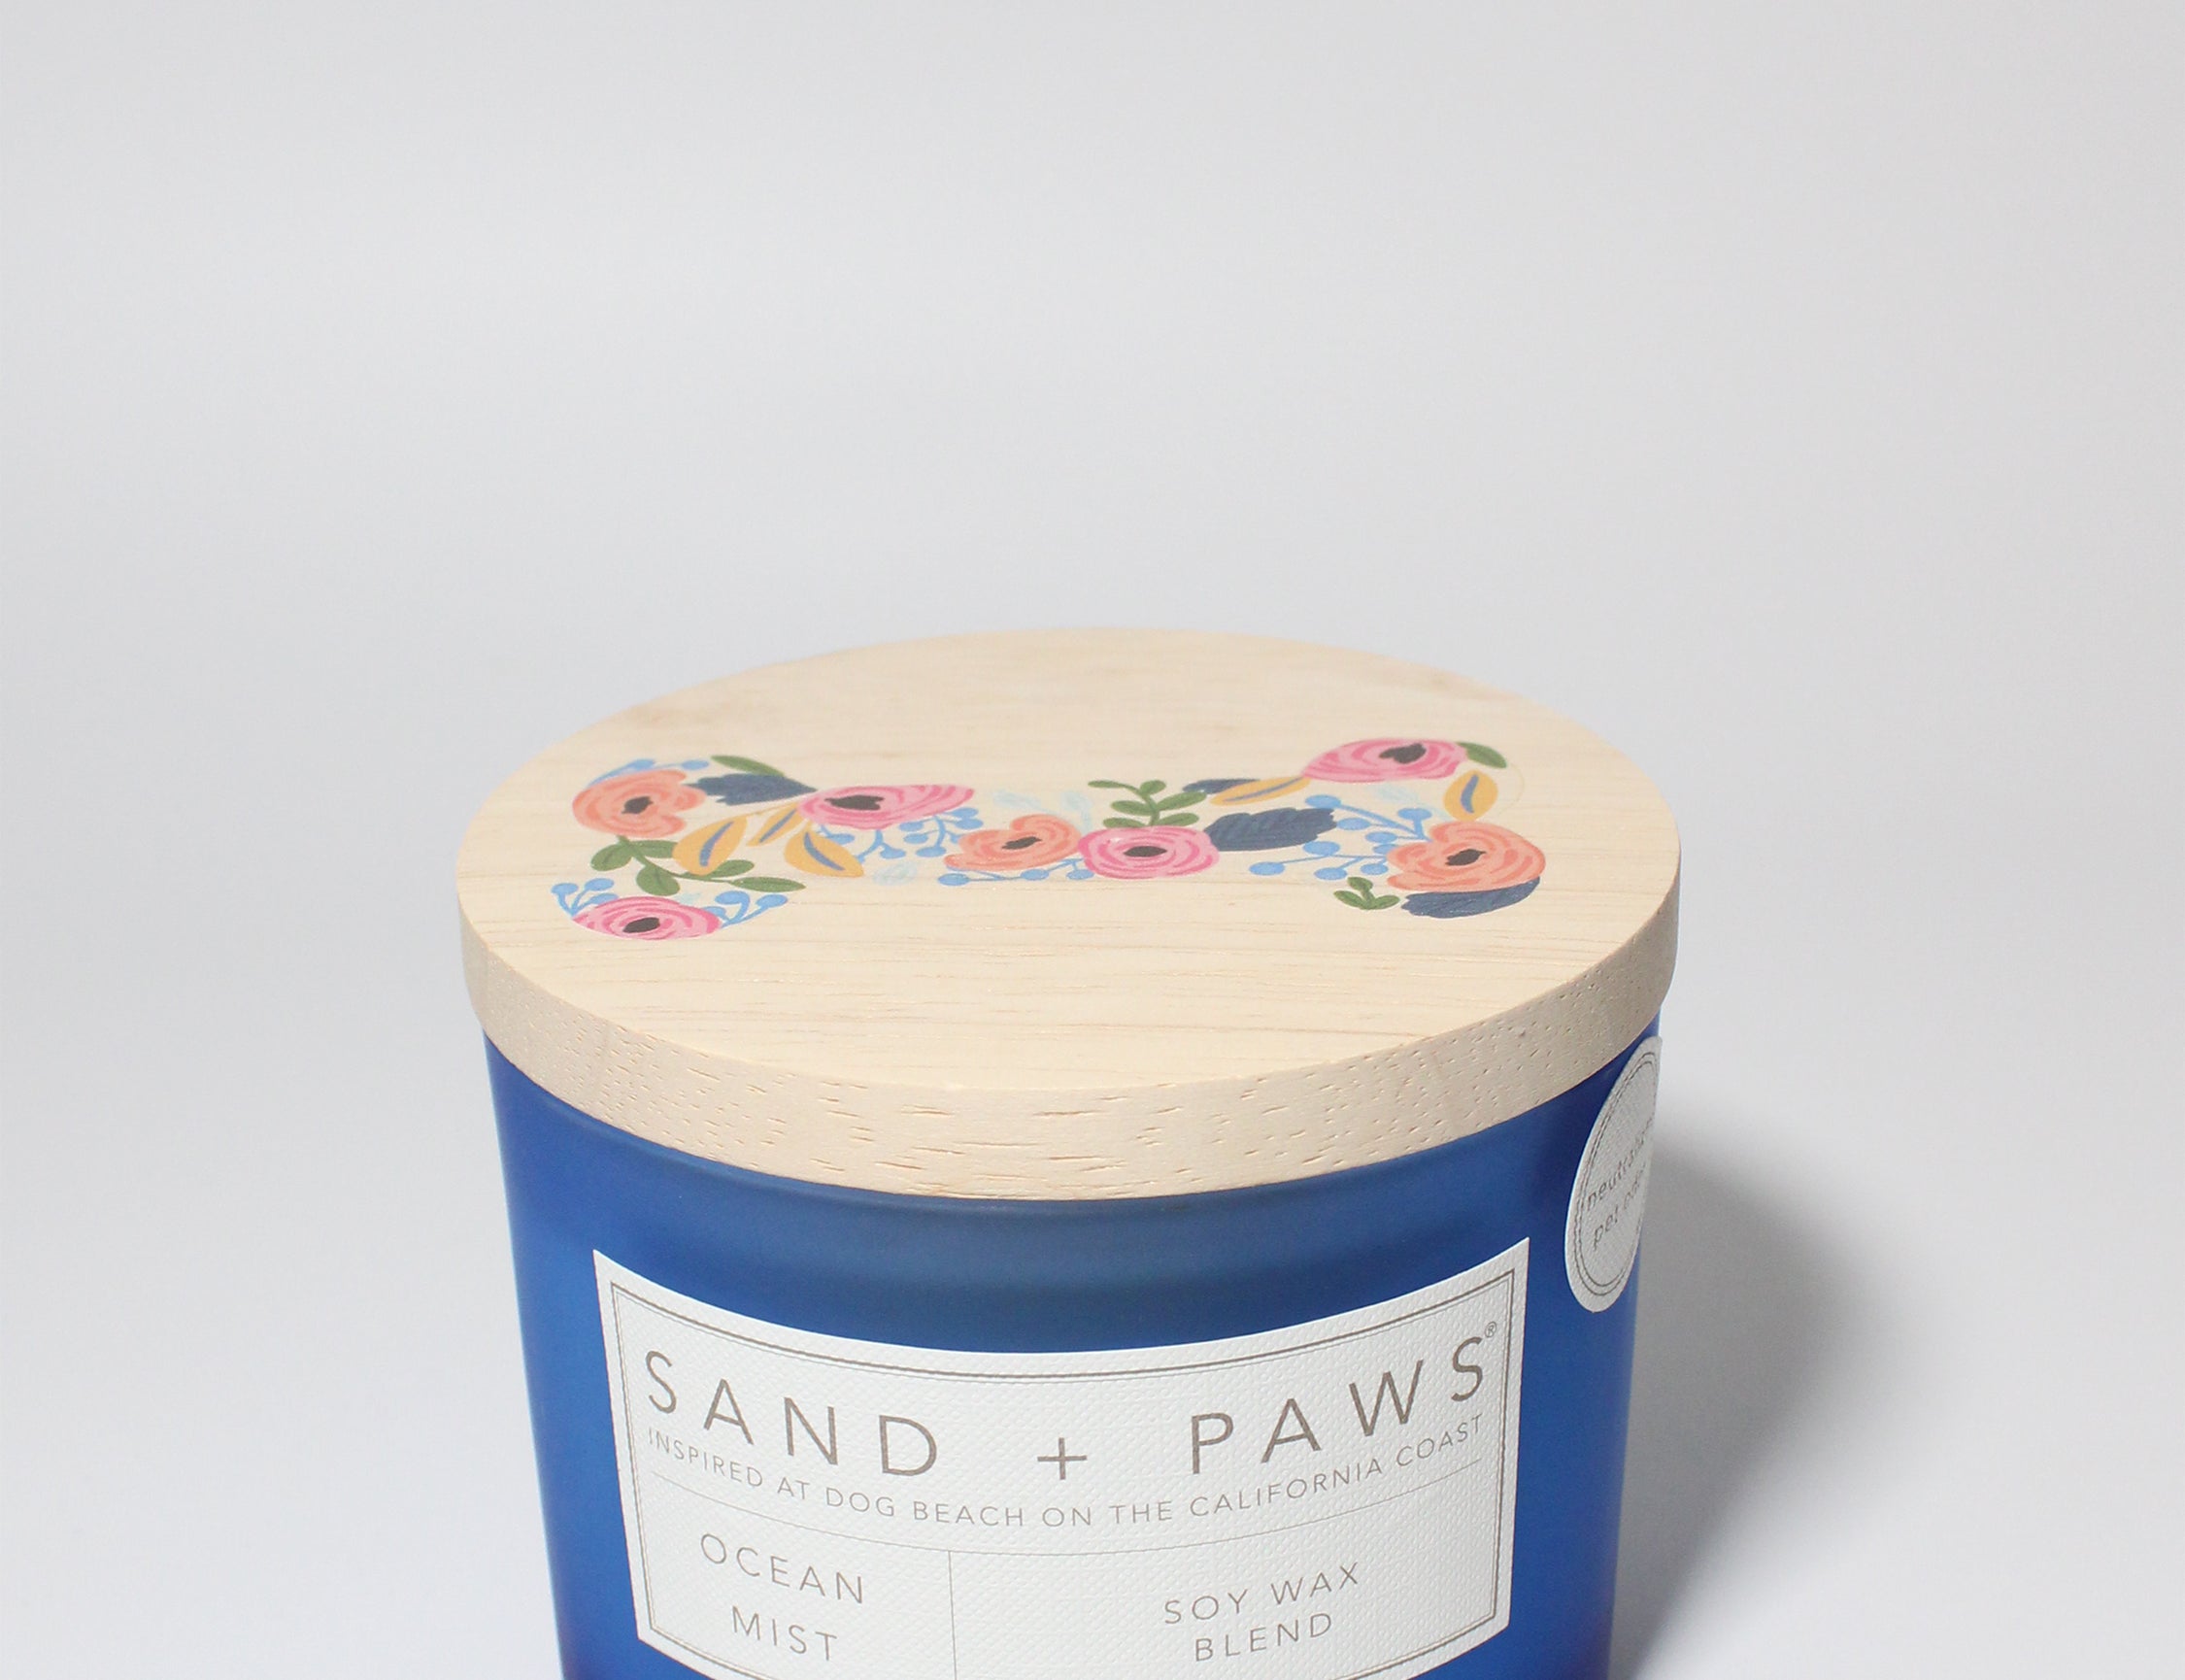 Sand + Paws Ocean Mist 12 oz scented candle Cobalt vessel with Painted floral bone lid